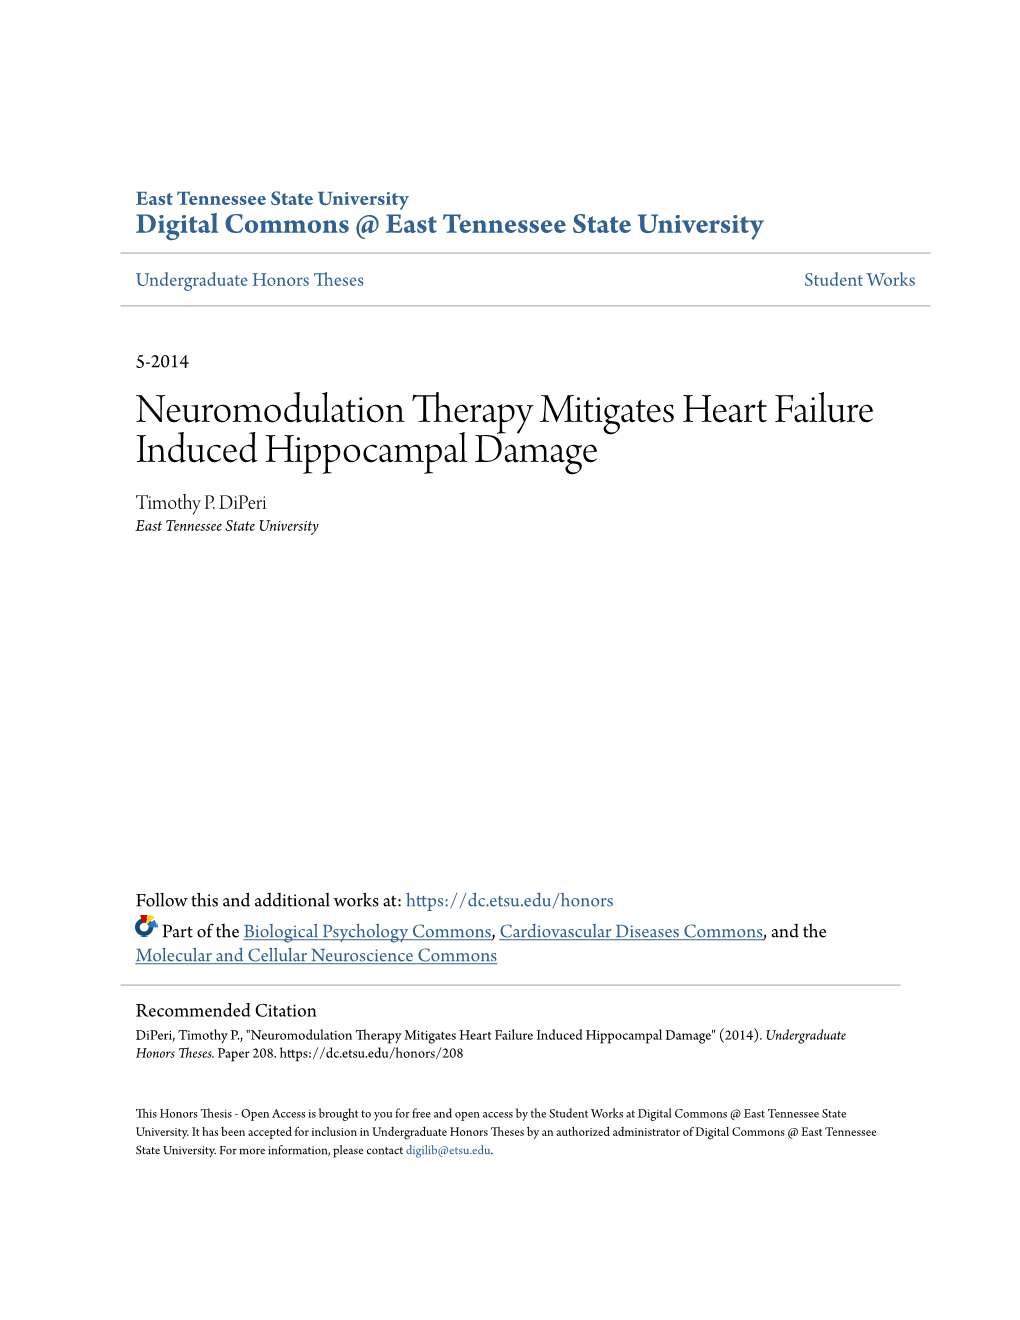 Neuromodulation Therapy Mitigates Heart Failure Induced Hippocampal Damage Timothy P